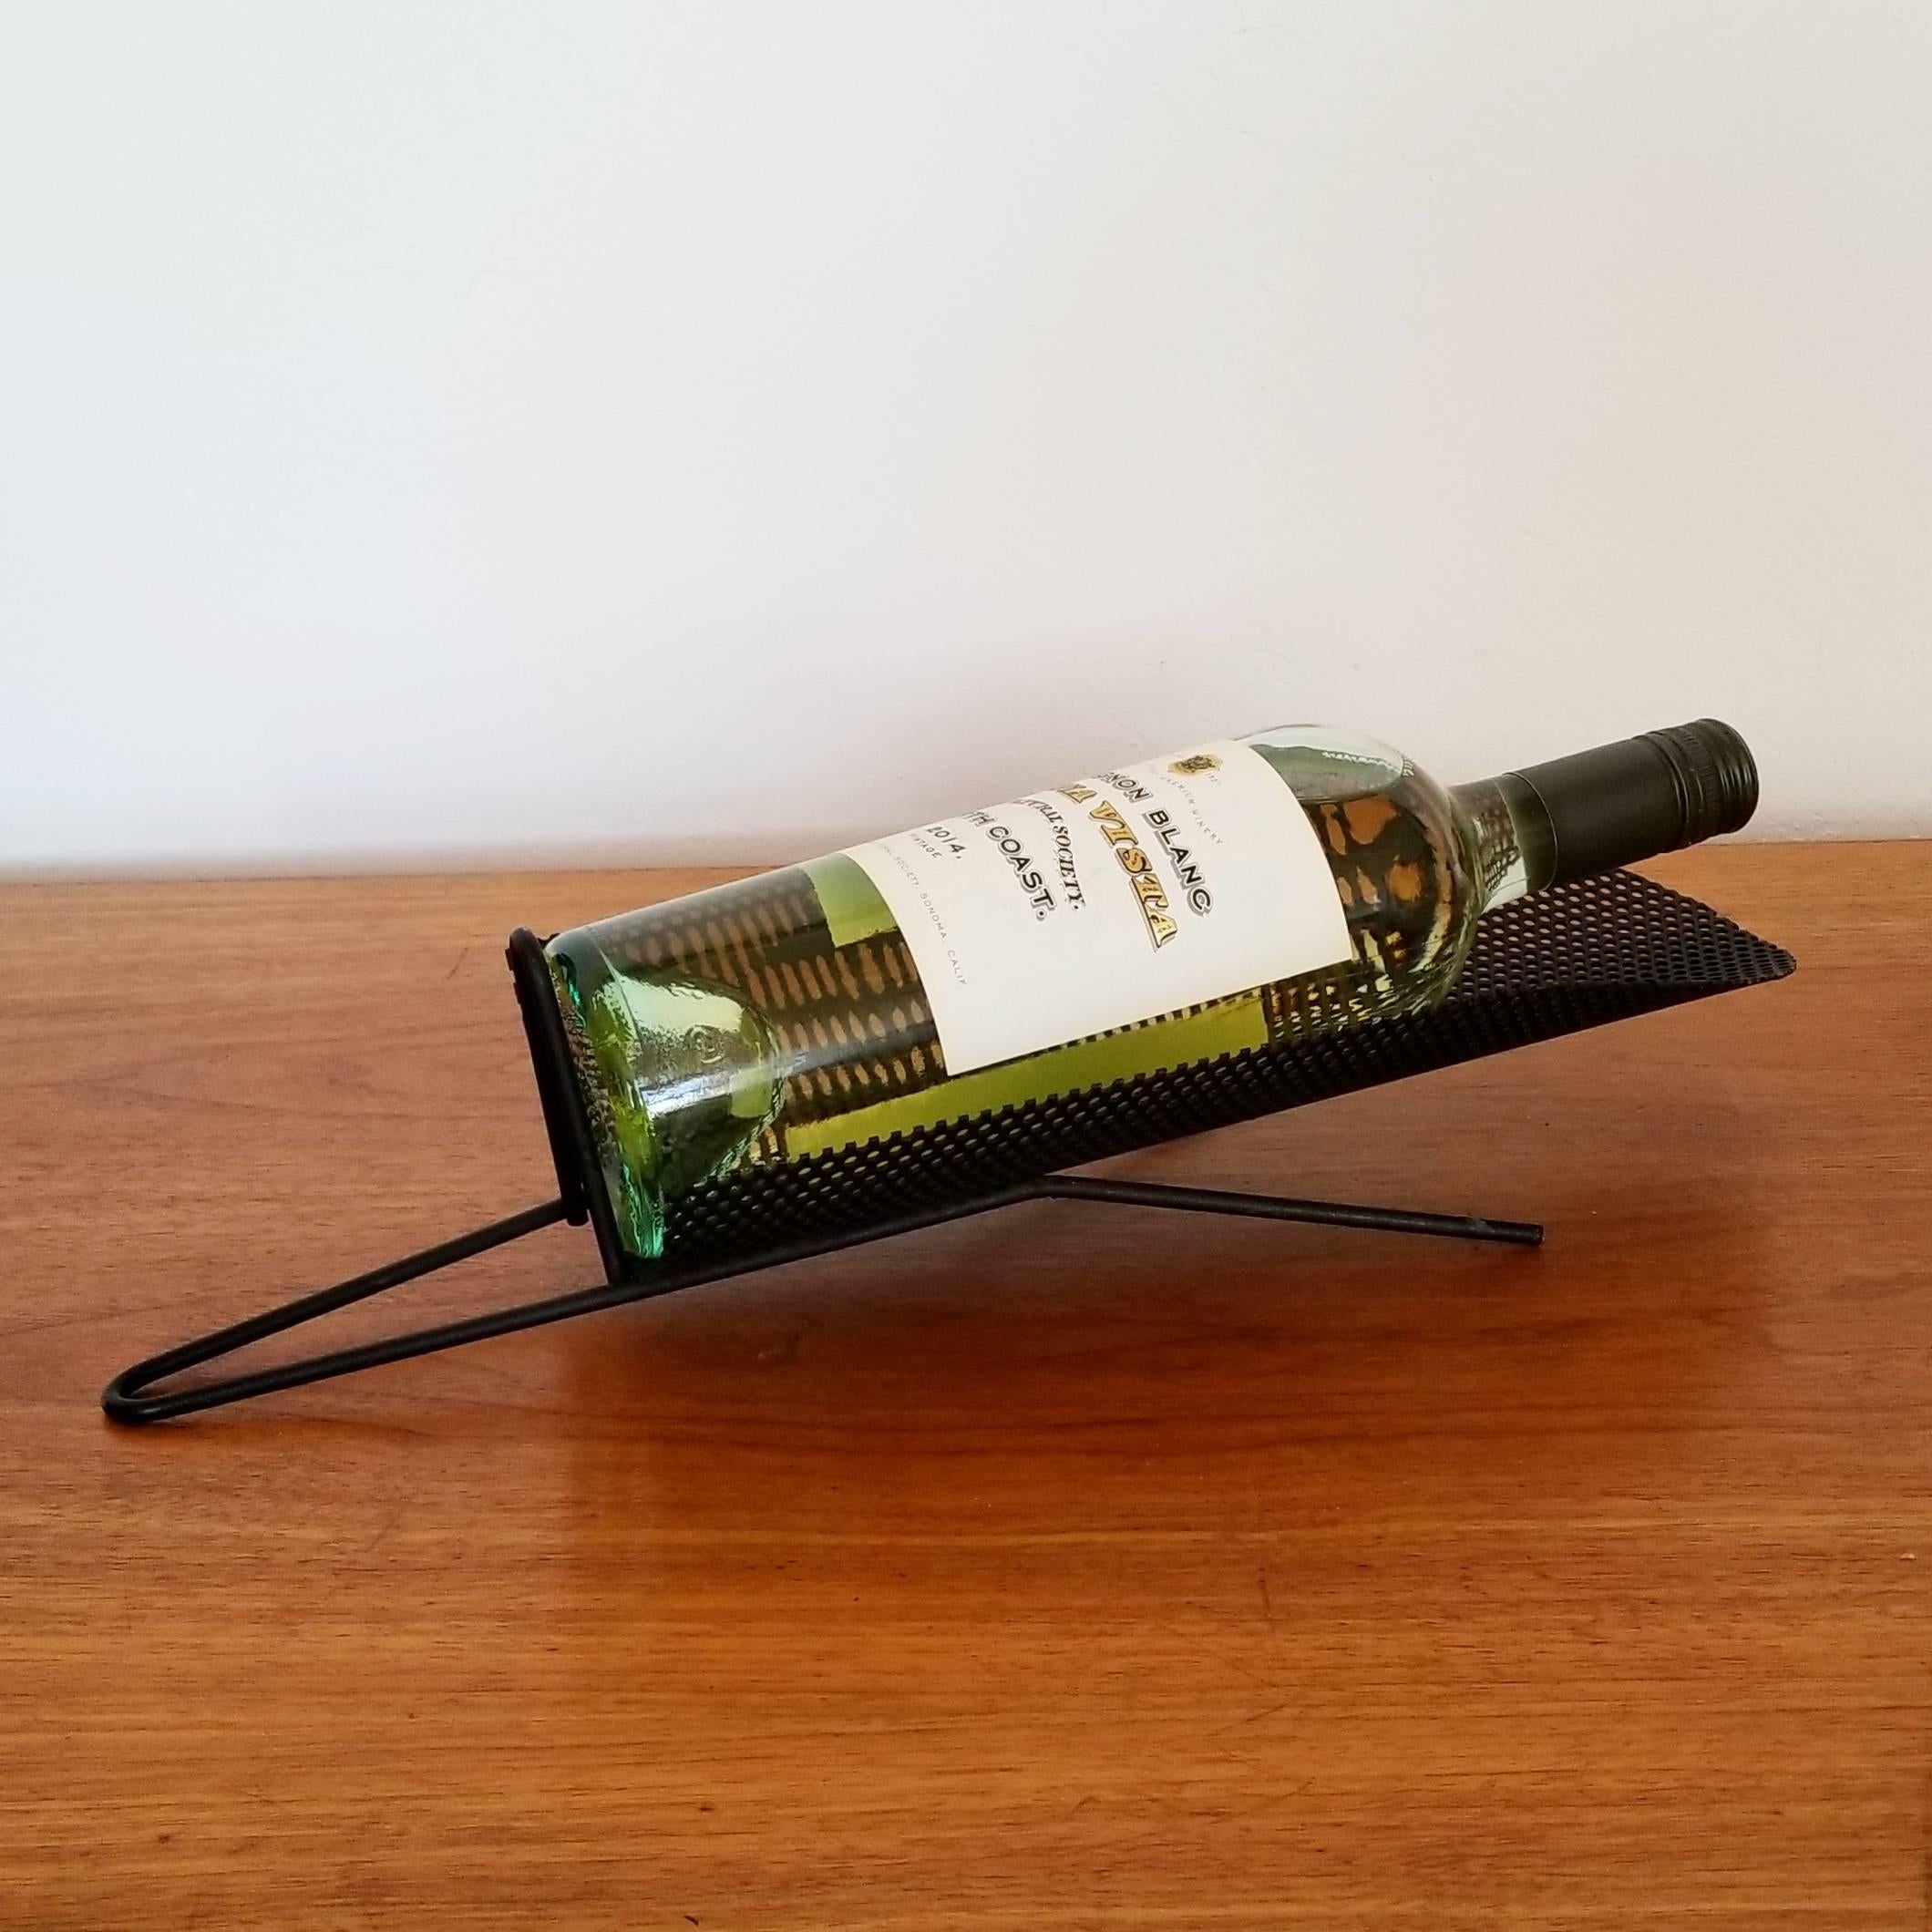 Early 1950s wine bottle holder constructed of perforated metal with hairpin elements.